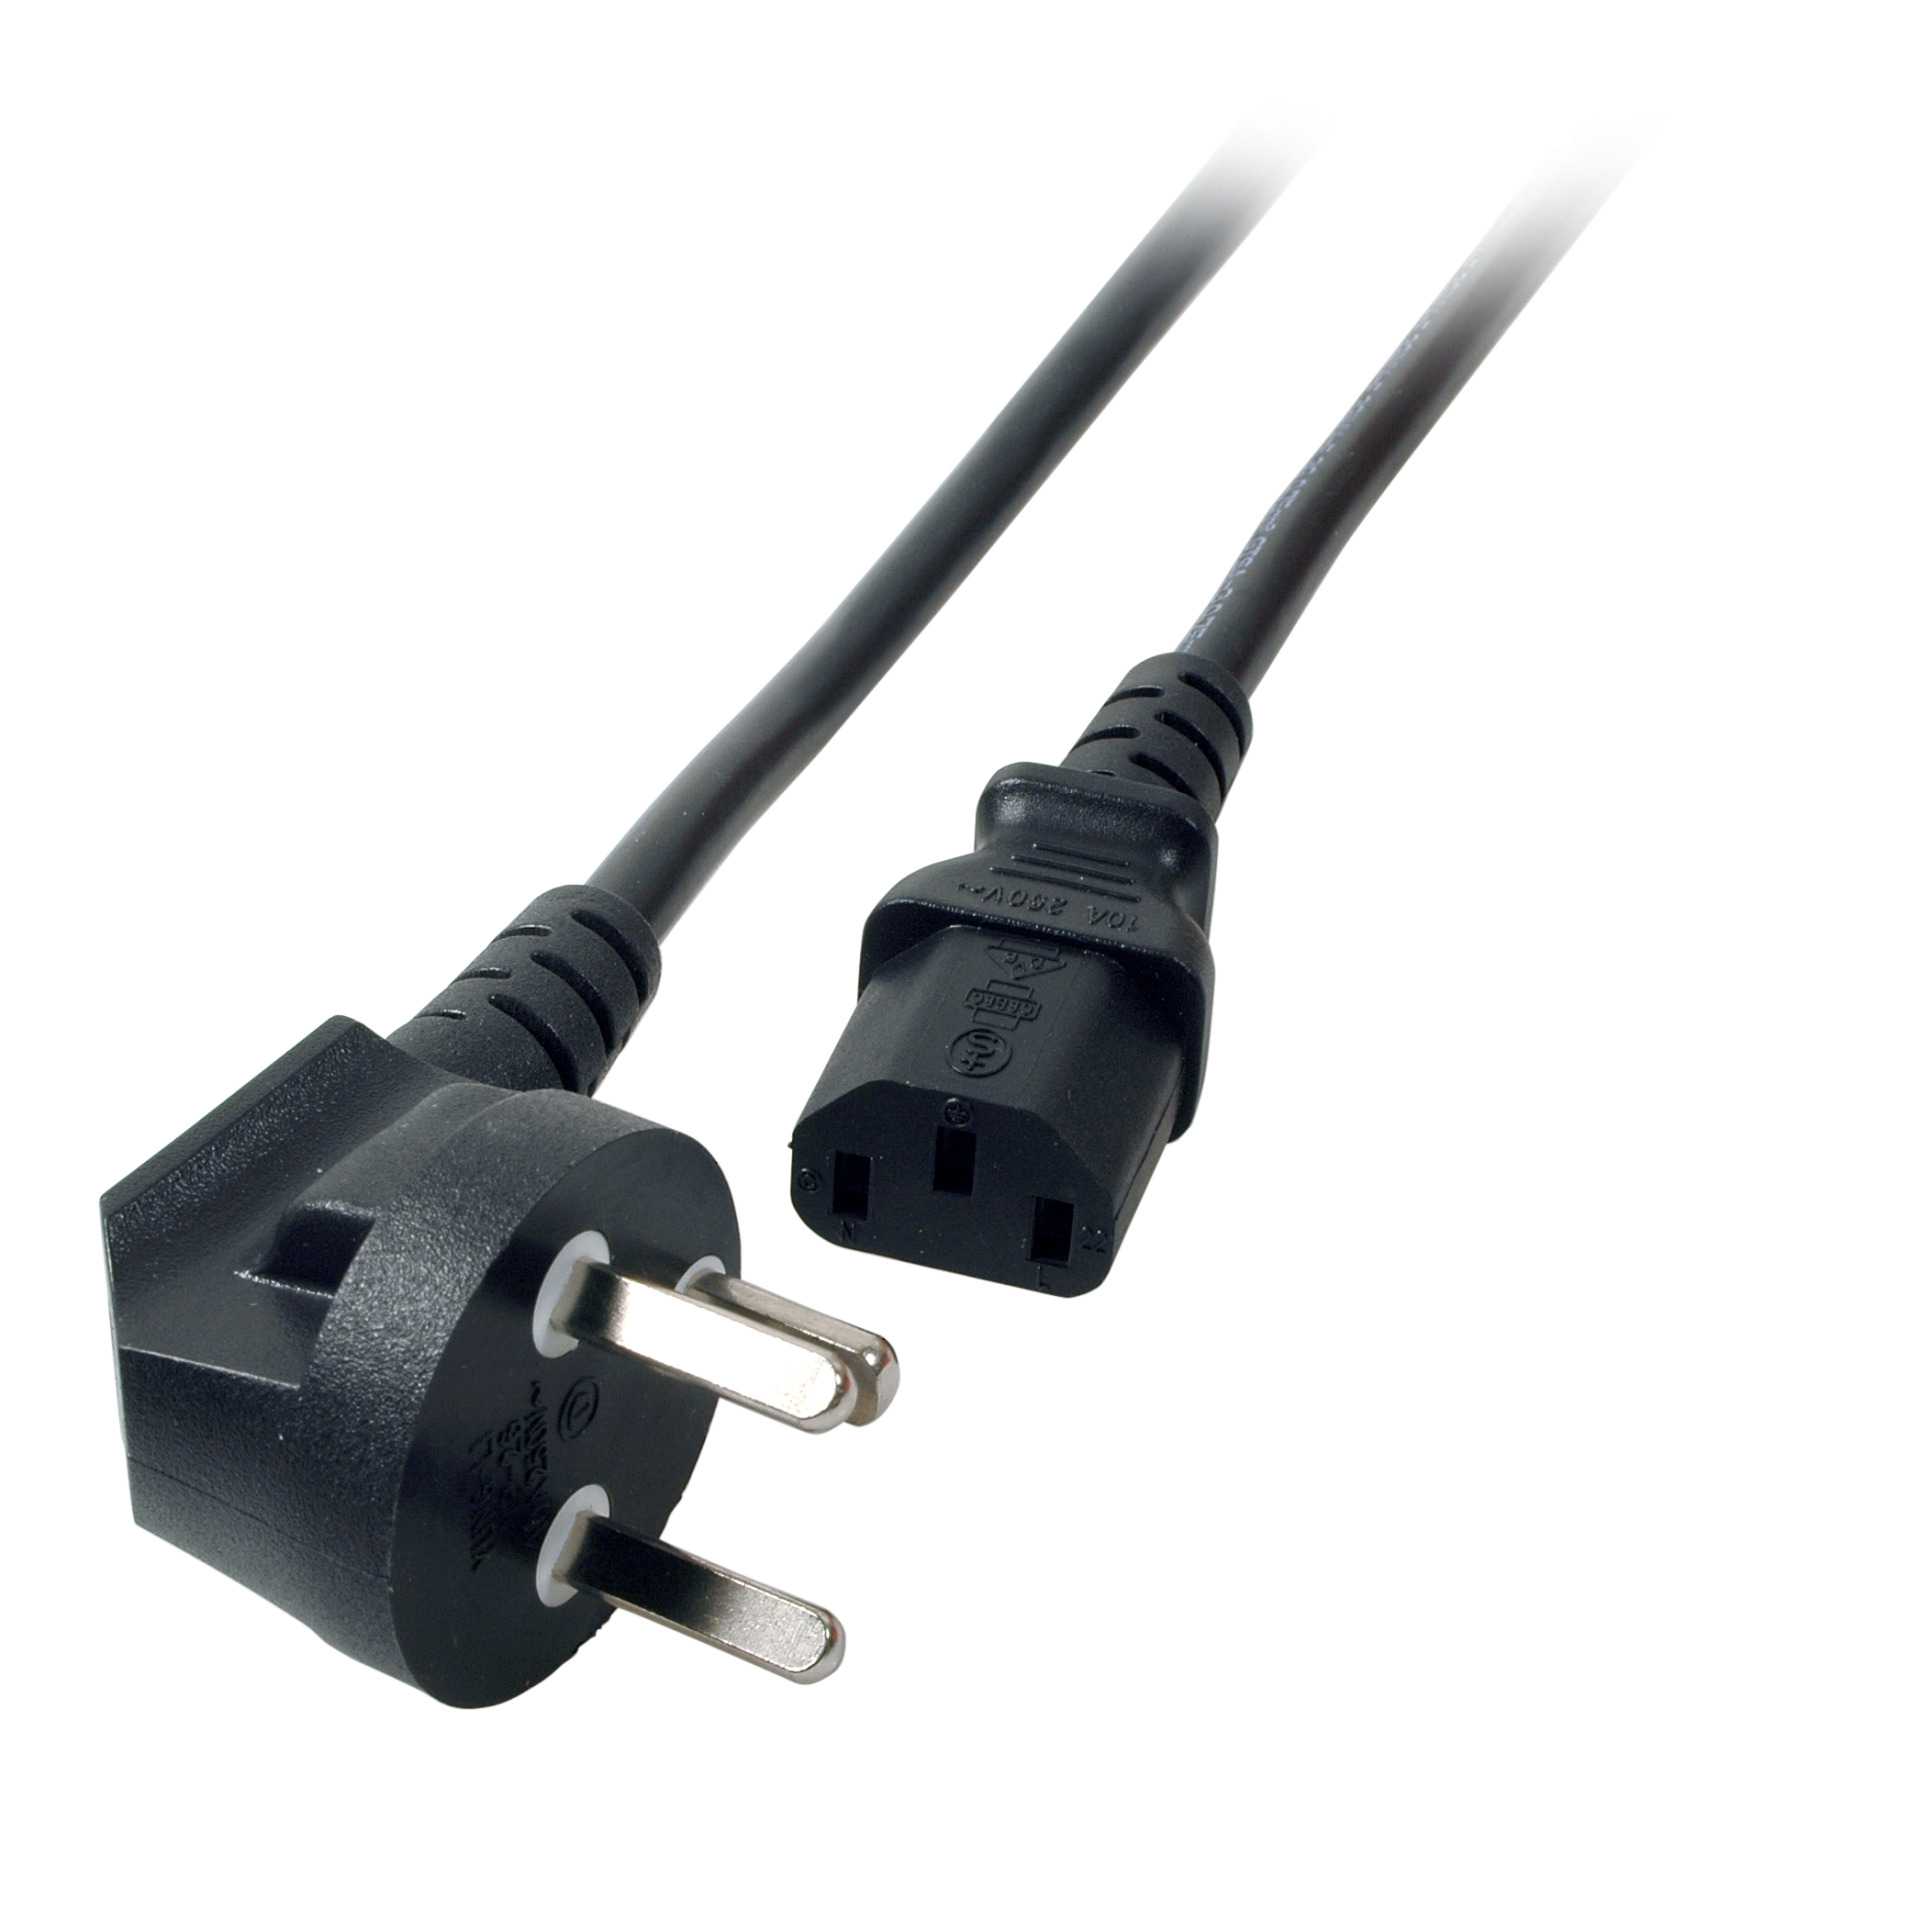 Power Cable Denmark DPin 90° - C13 180°, Black, 1.8 m, 3 x 0.75 mm²